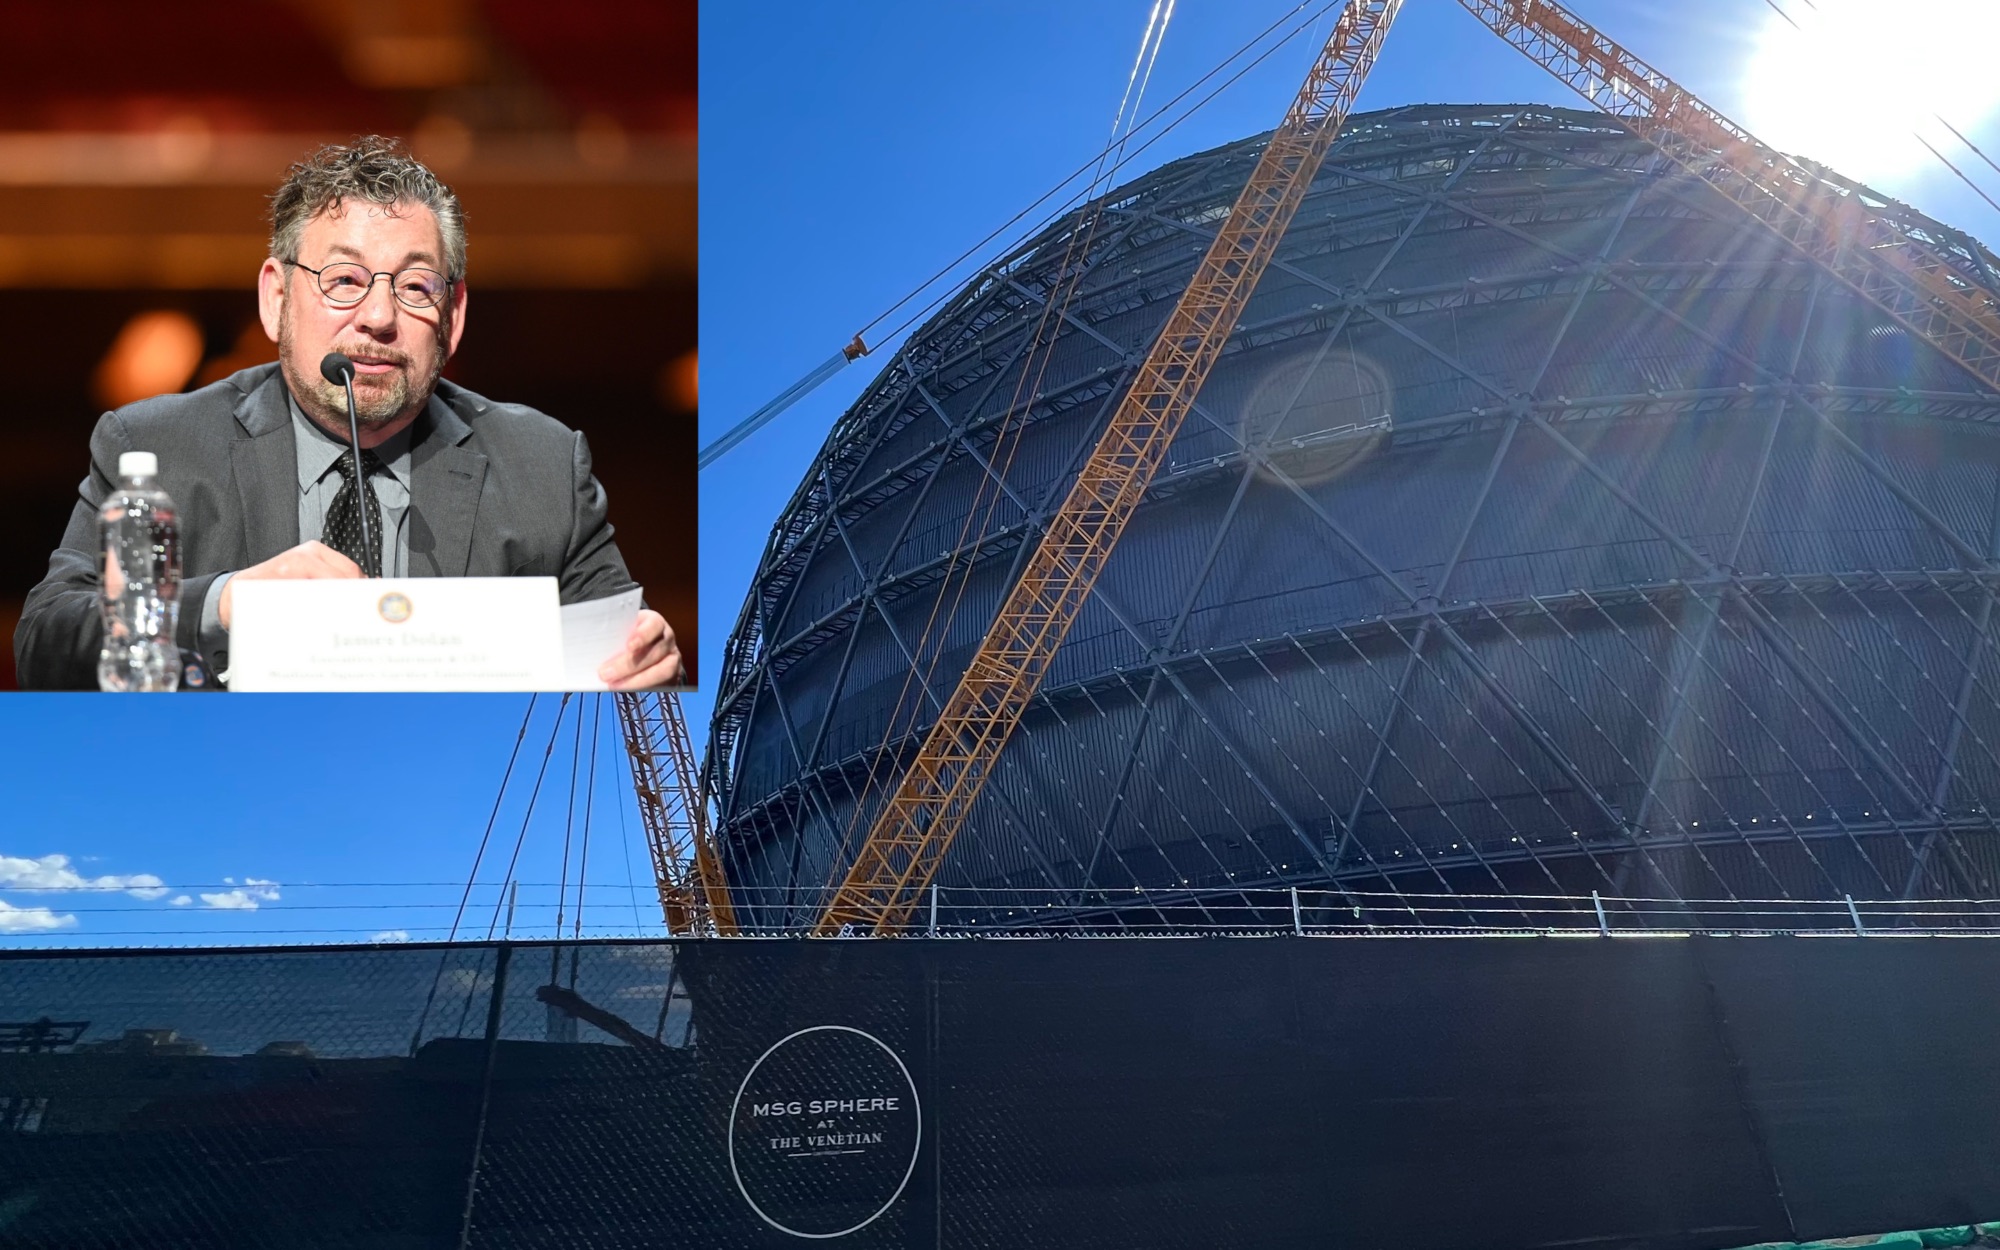 A photo of James Dolan inset into a photo of the Sphere under construction.